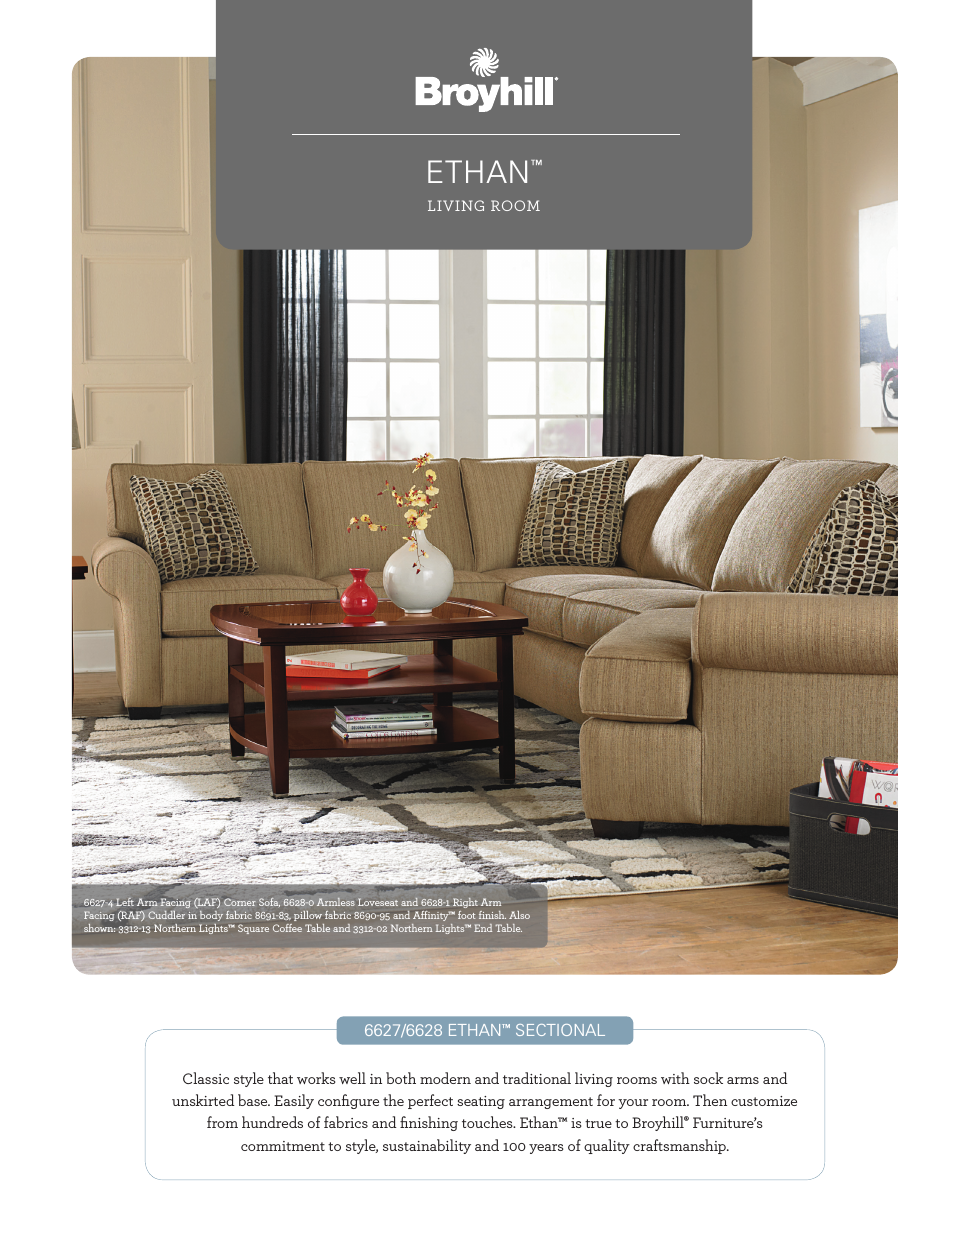 ETHAN SECTIONAL Product Details